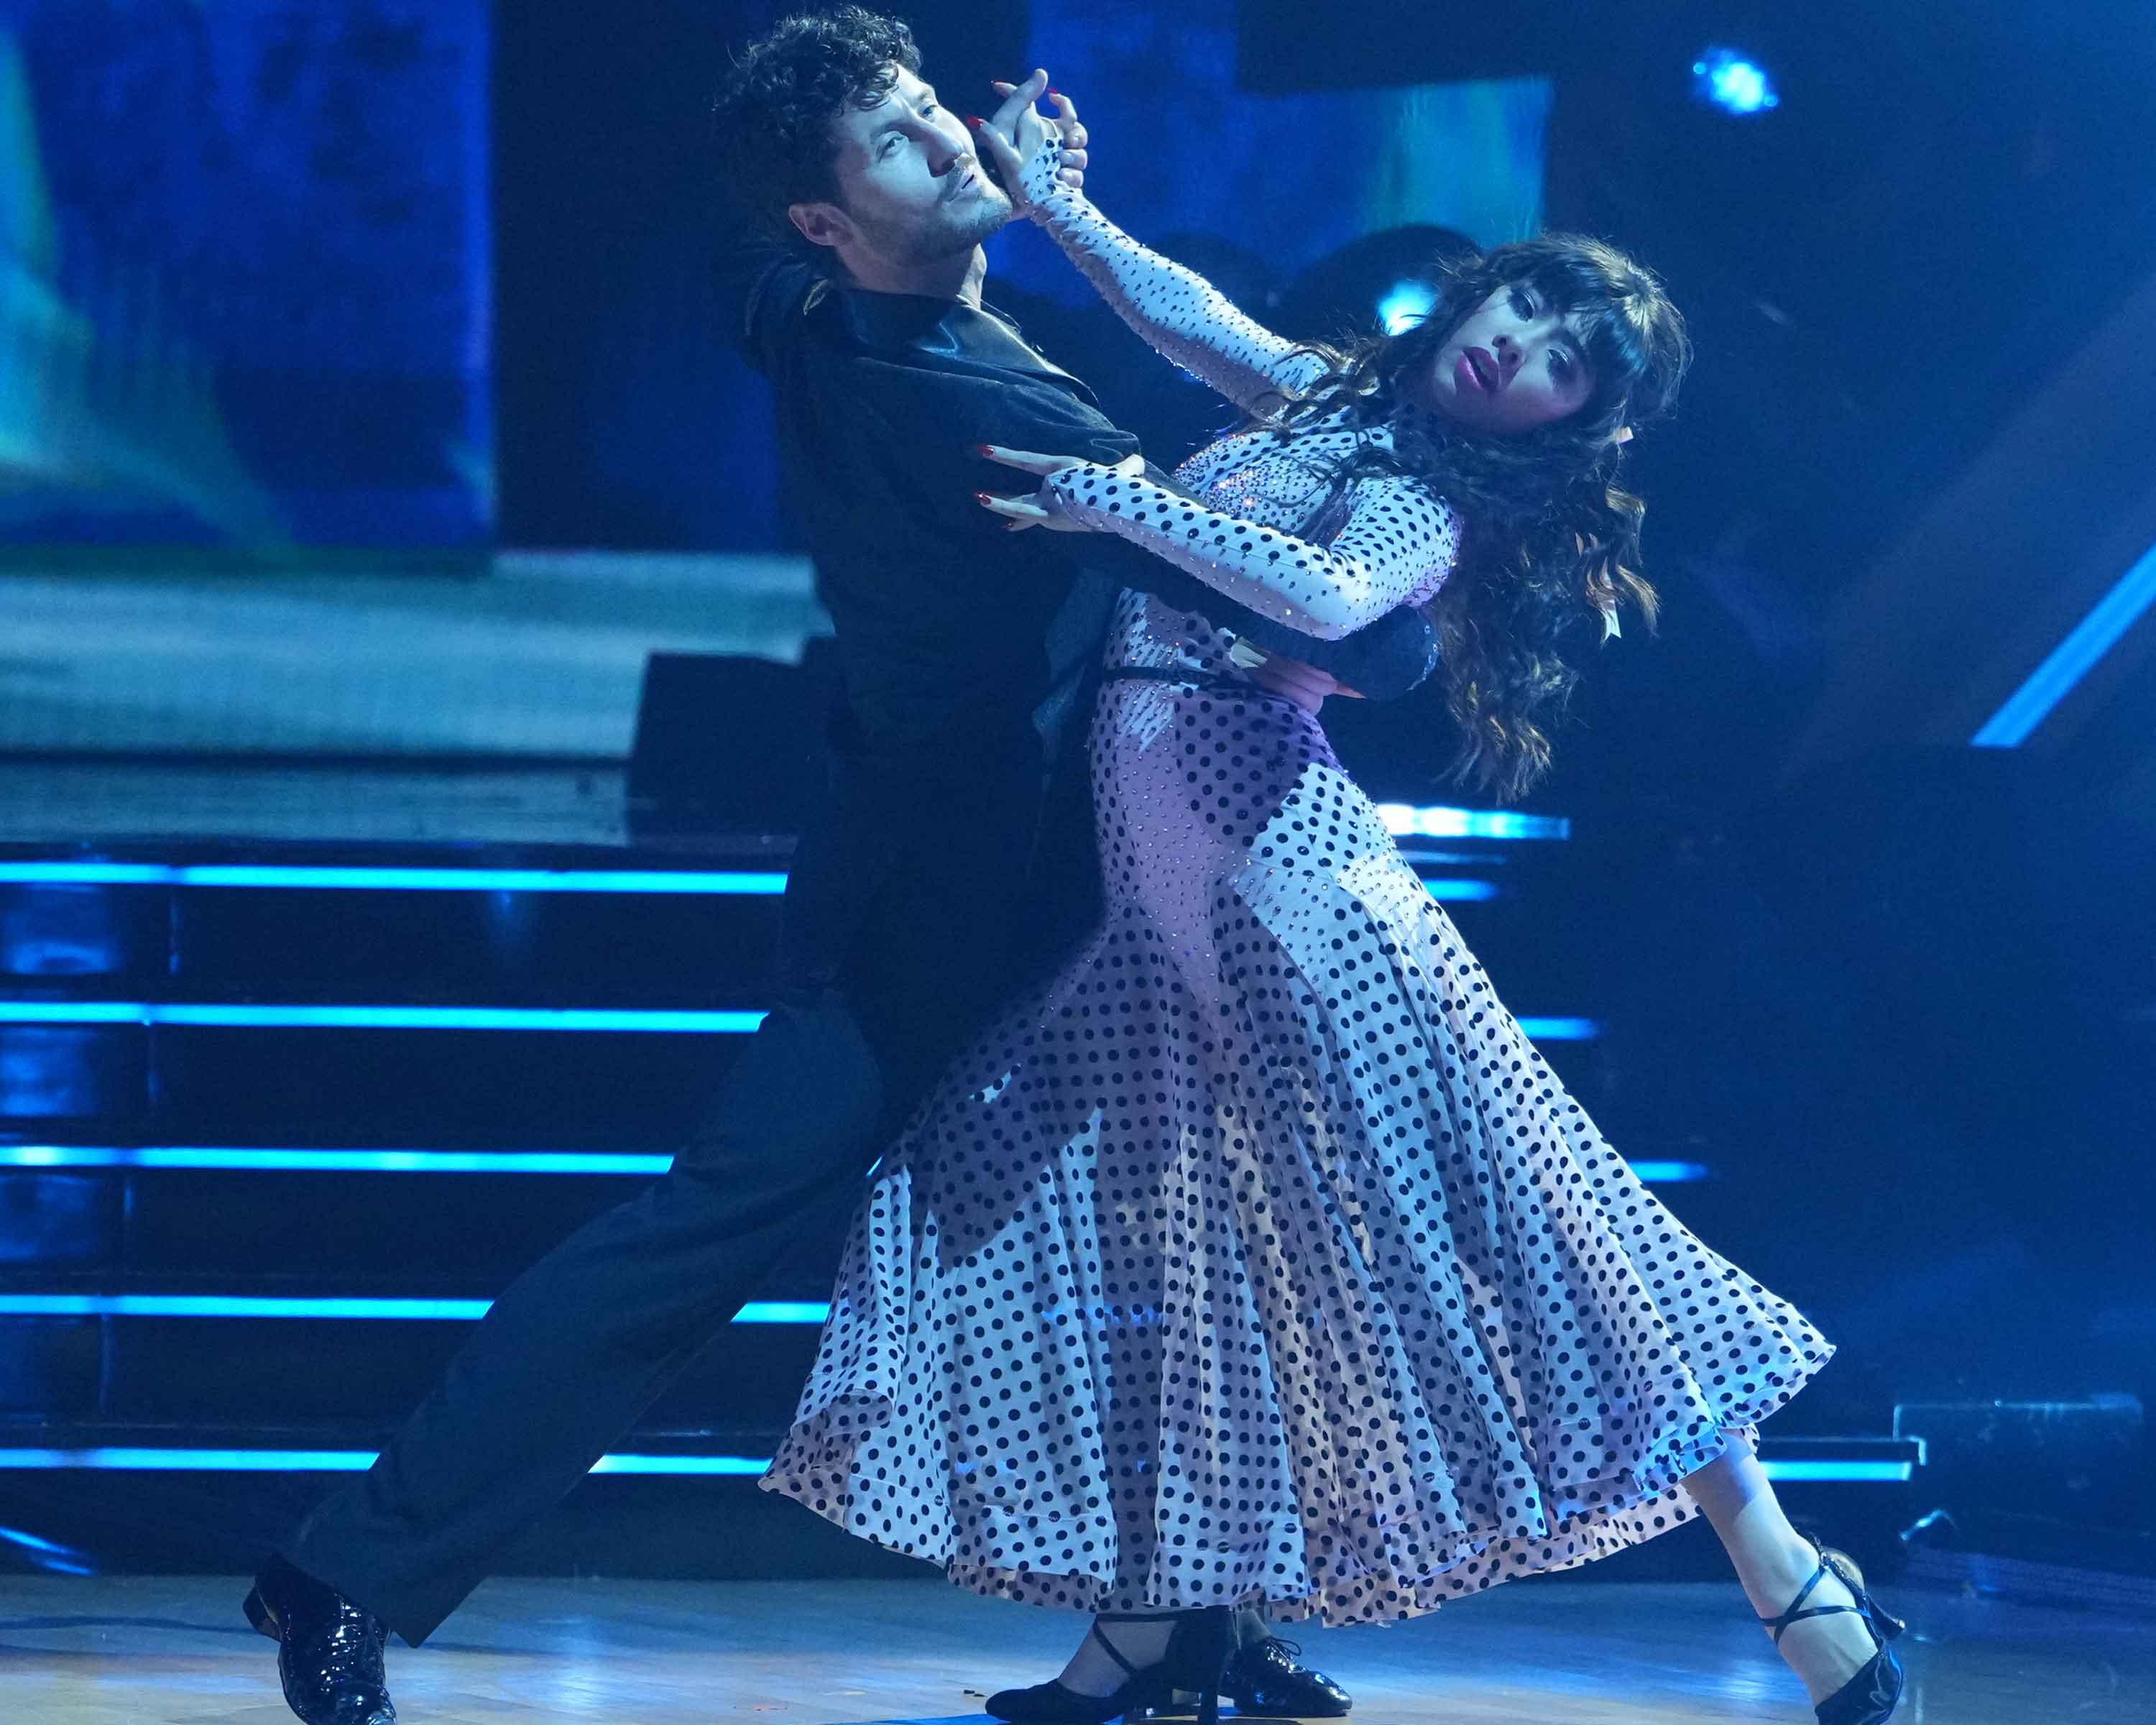 Xochitl Gomez and Val Chmerkovskiy the winner of the Dancing with the Stars season 32